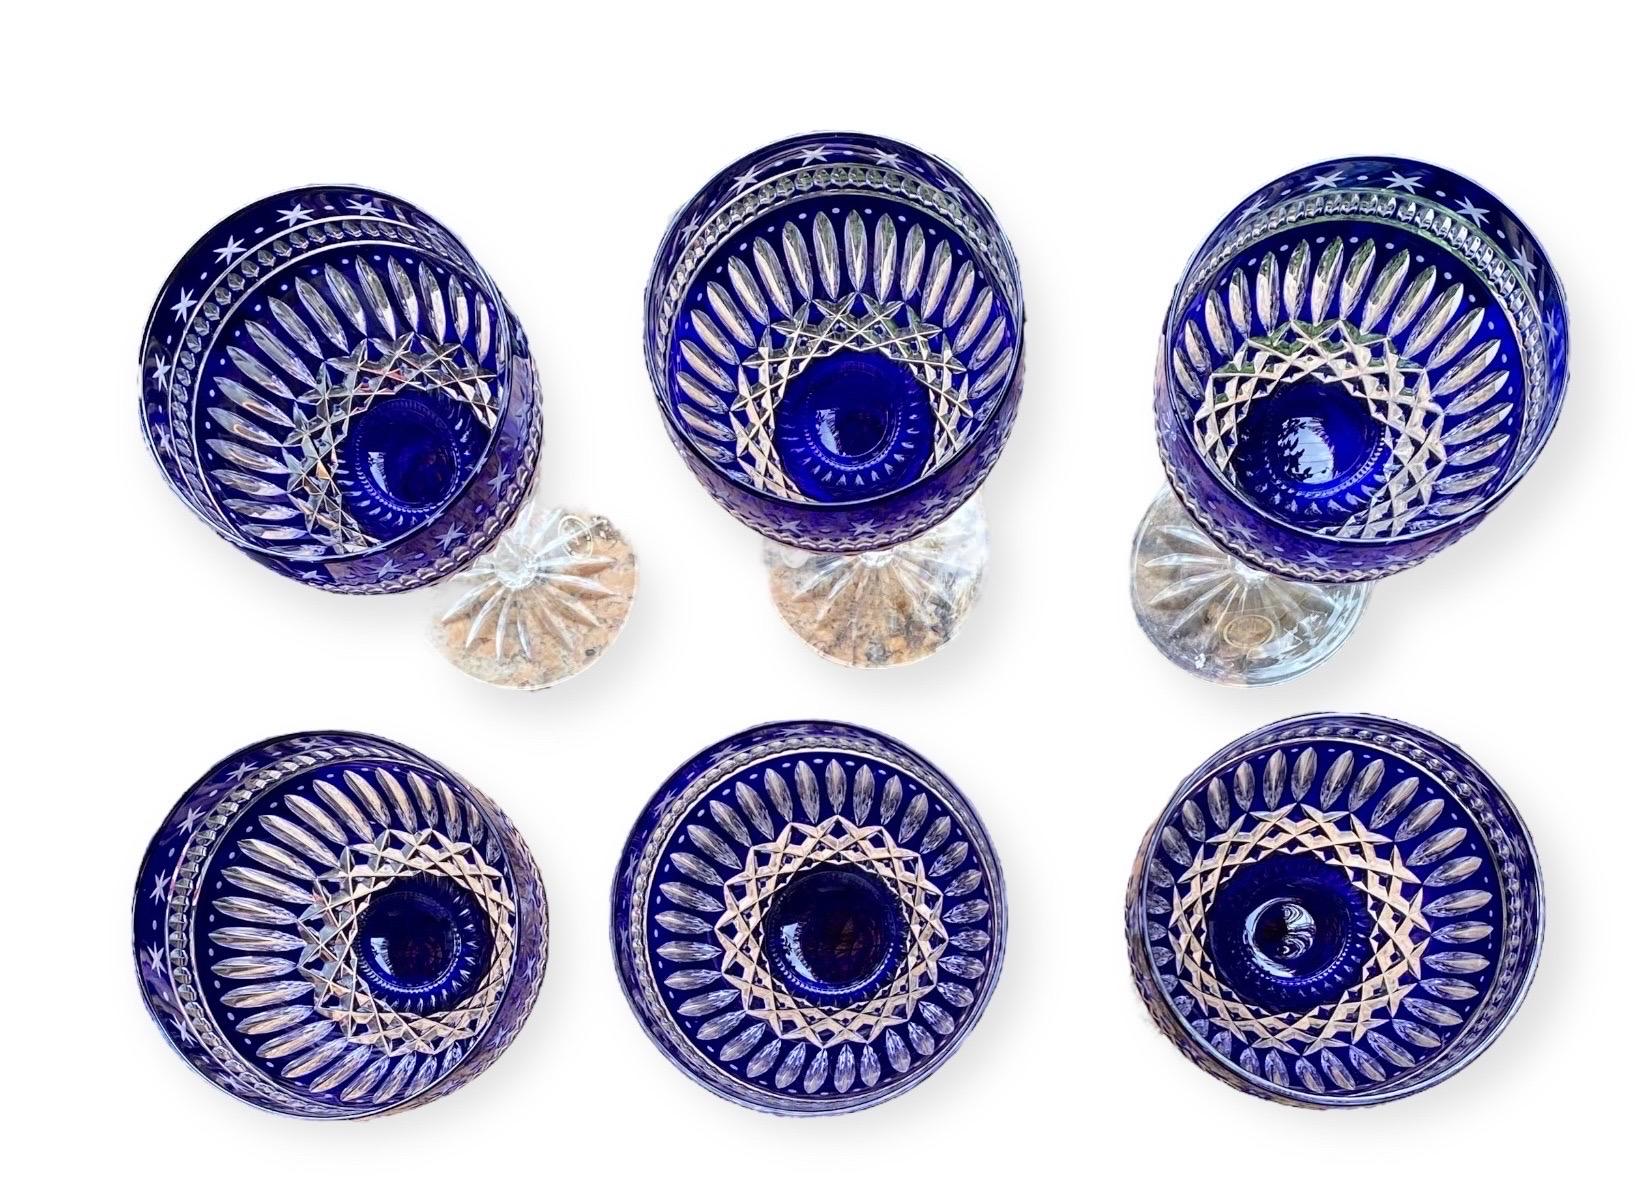 Set of six outstanding, large Ajka Serenity Star Language Of Jewels Cobalt Blue Cased Cut To Clear Crystal Wine Or Water Glasses. Large volume- holds 14 oz. each.

Ajka Crystal is a Hungarian crystal manufacturer that was founded in 1878 by Bernard